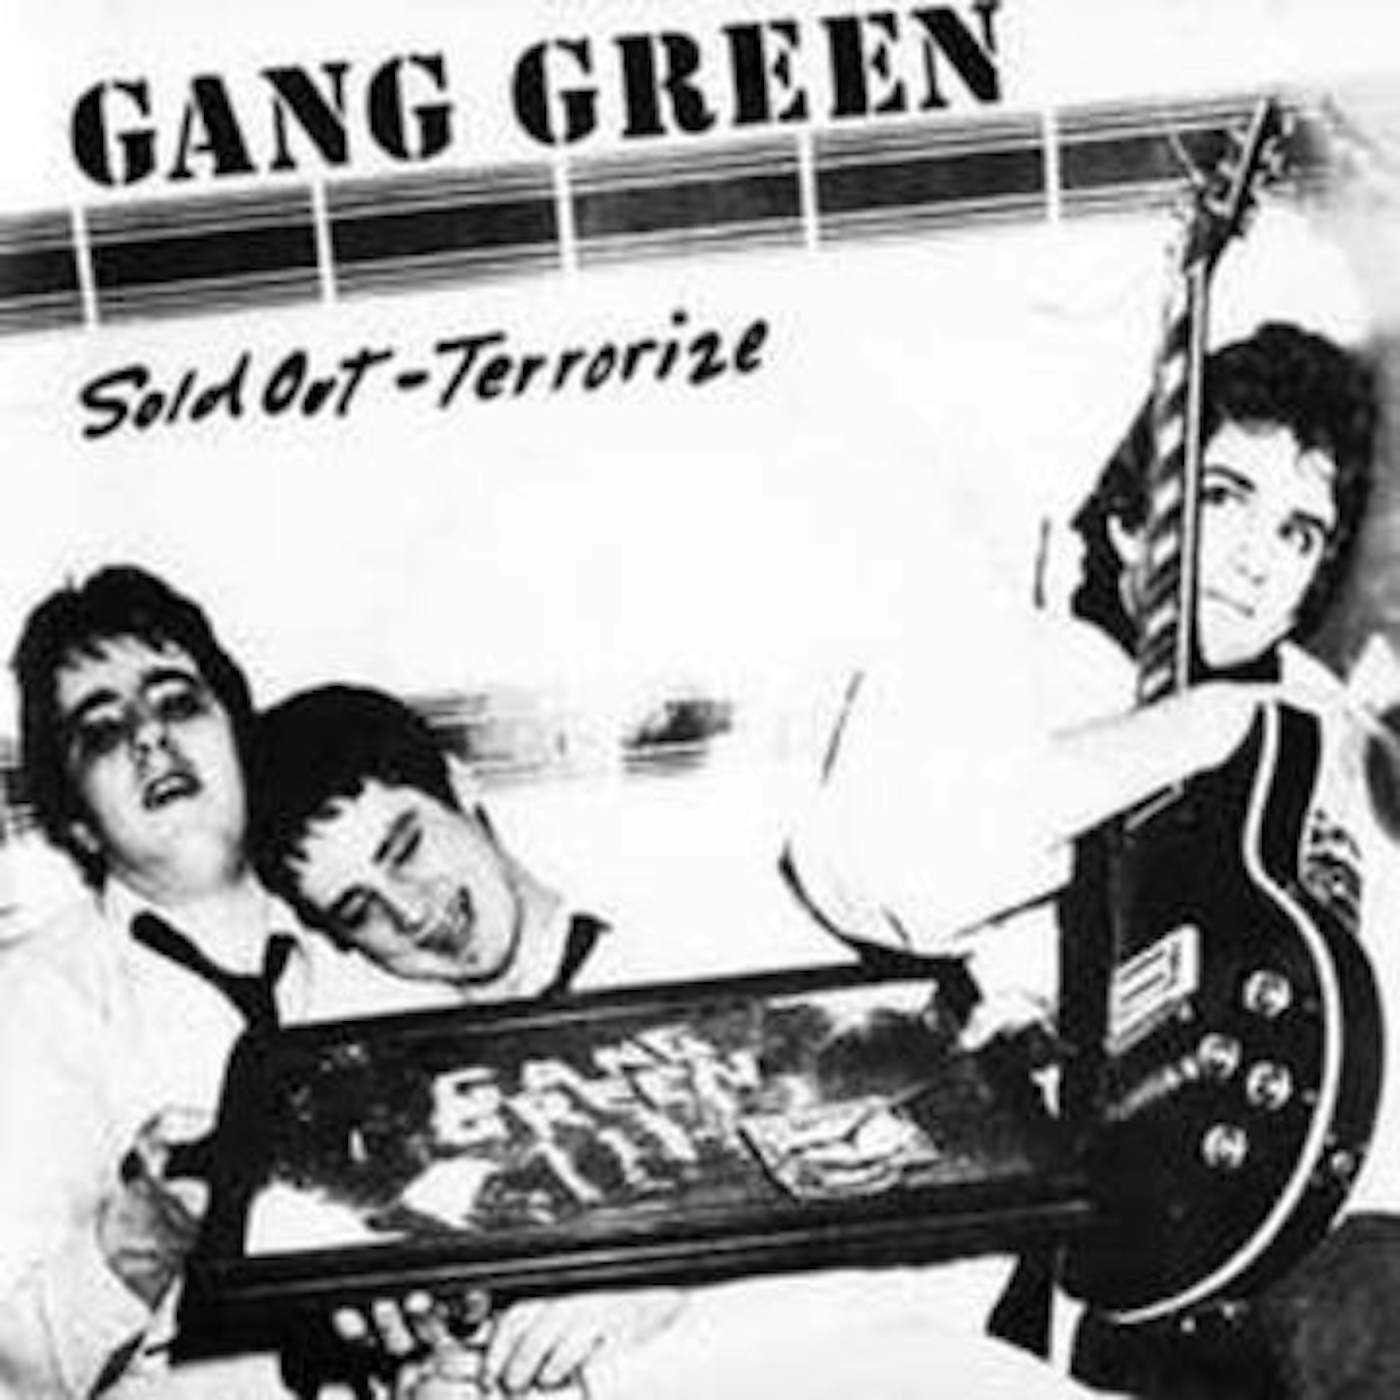 Gang Green Sold Out/Terrorize Vinyl Record